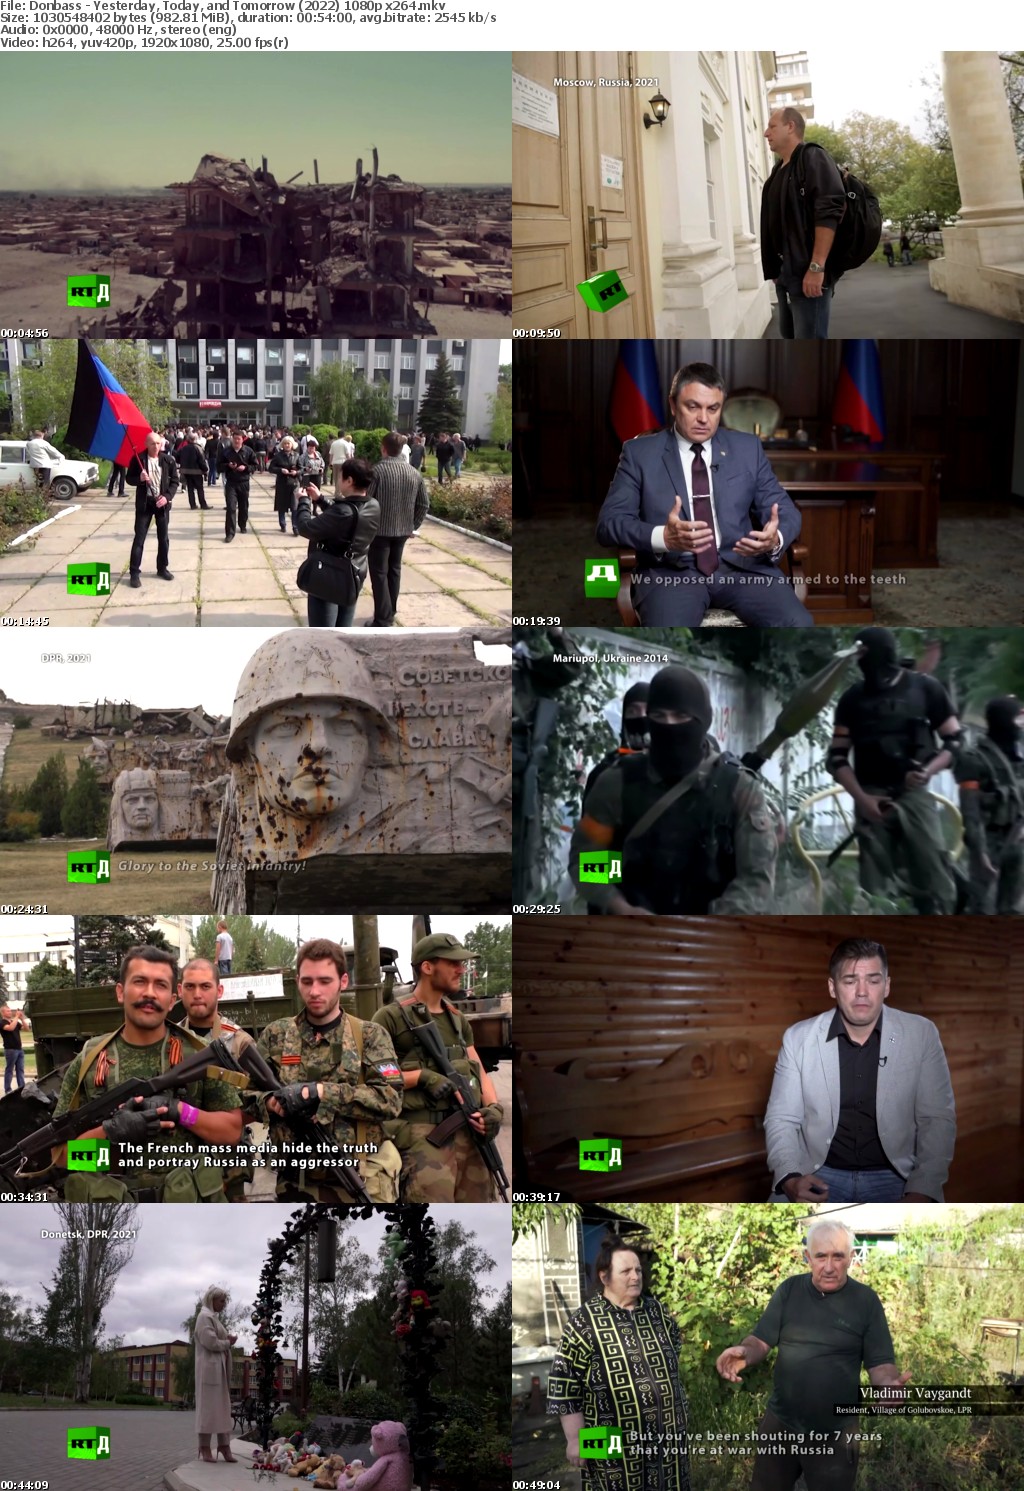 Donbass - Yesterday, Today, and Tomorrow (2022) 1080p x264 mkv